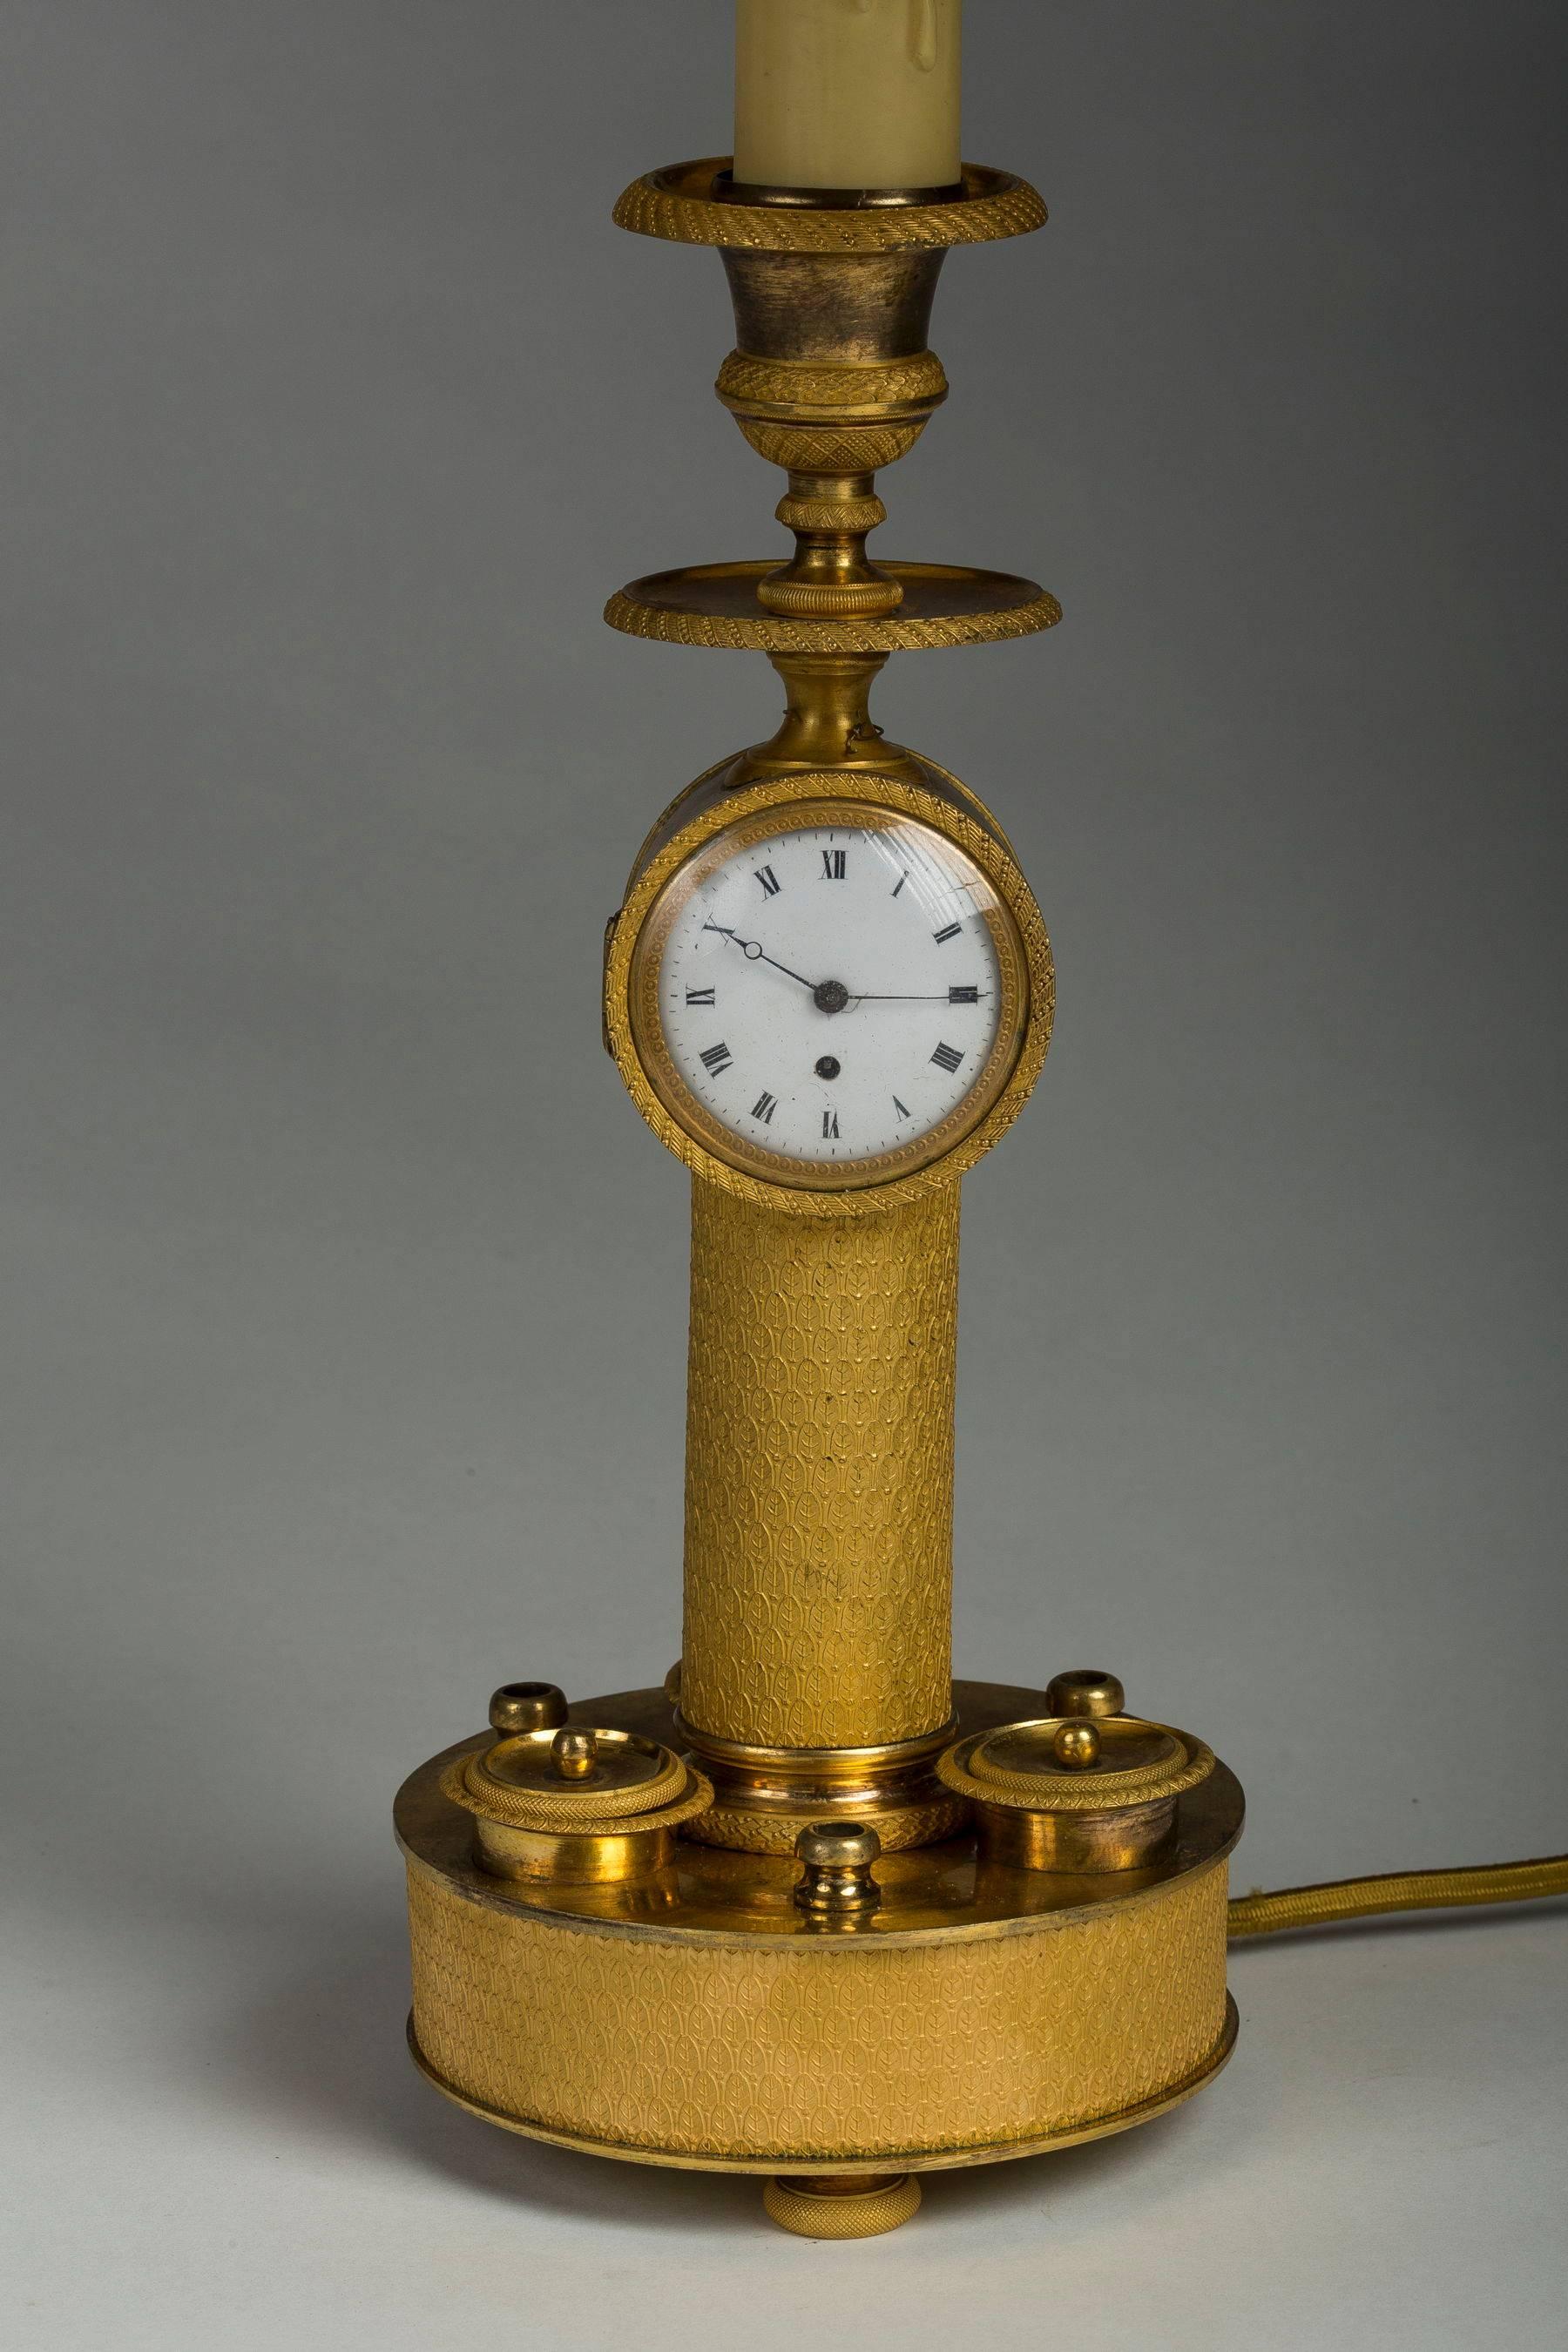 The circular base fitted with three inkwell compartments, the finely chased stem with an unmarked round clock and ending in a nozzle, mounted as a lamp.